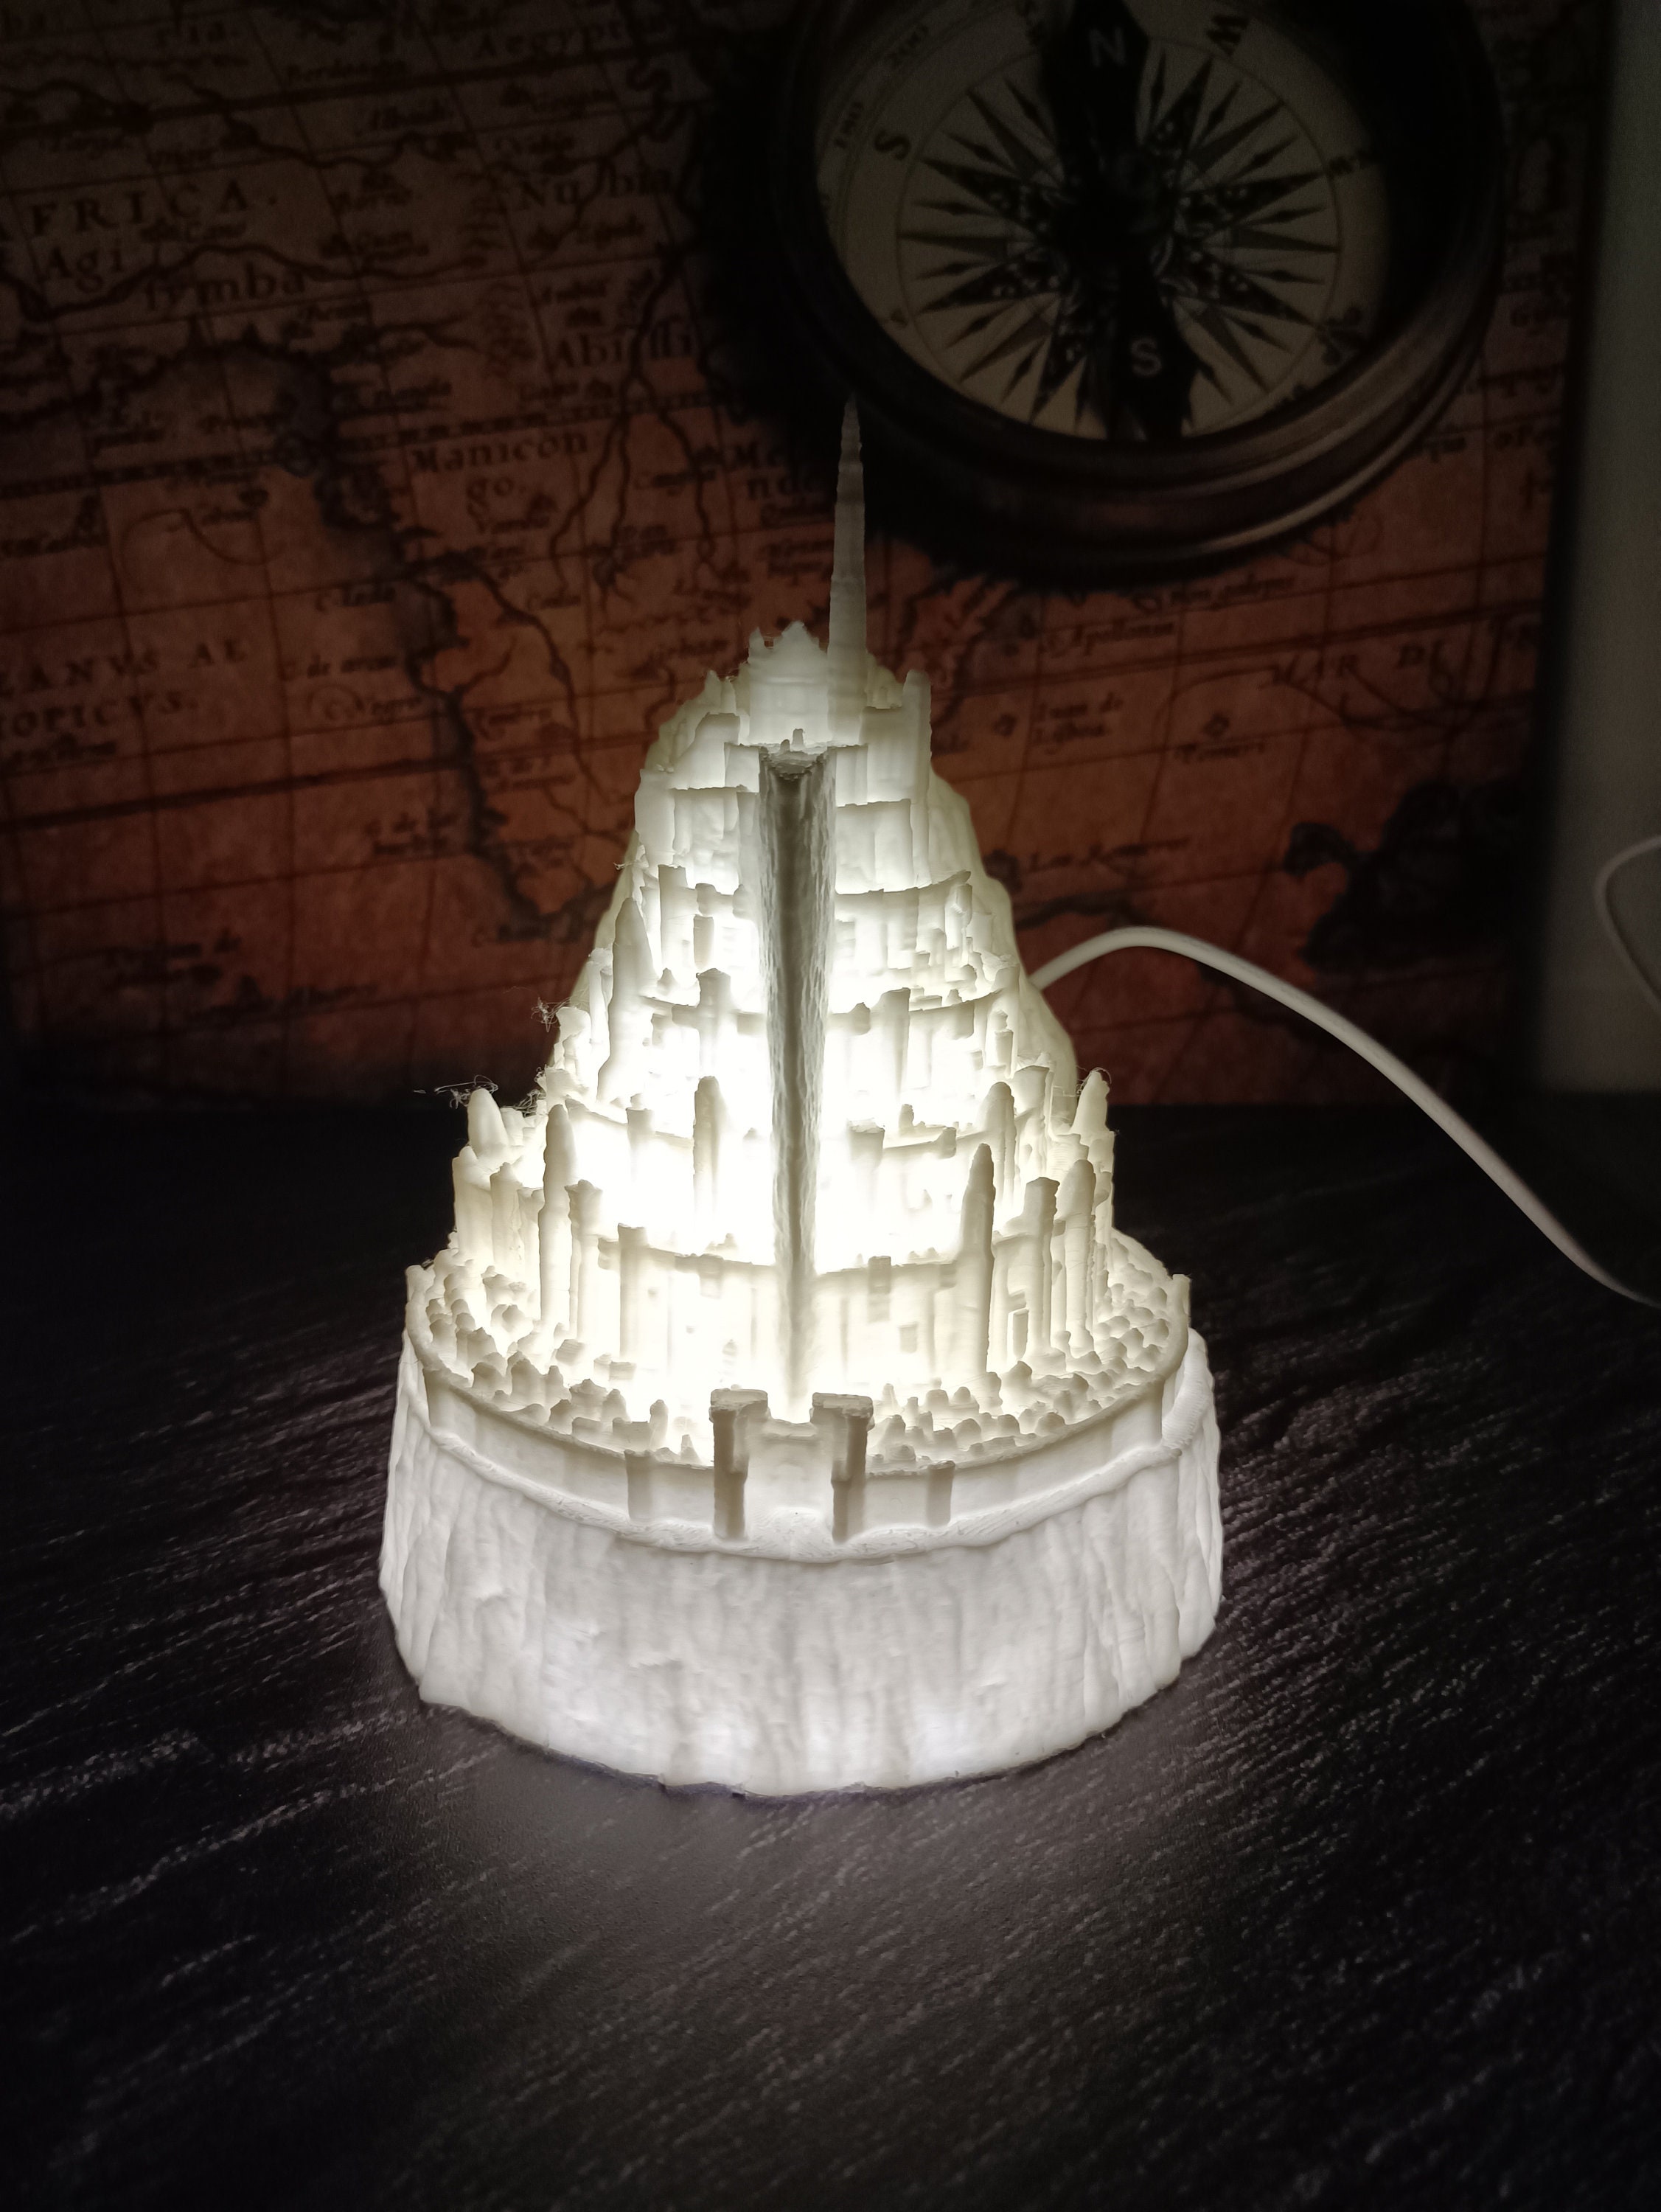 Lord of the Rings Lamp / Lord of the Rings Gift / Lord of the Rings Decor /  LOTR Led Lamp / One Ring Lamp / Sauron / Lotr 